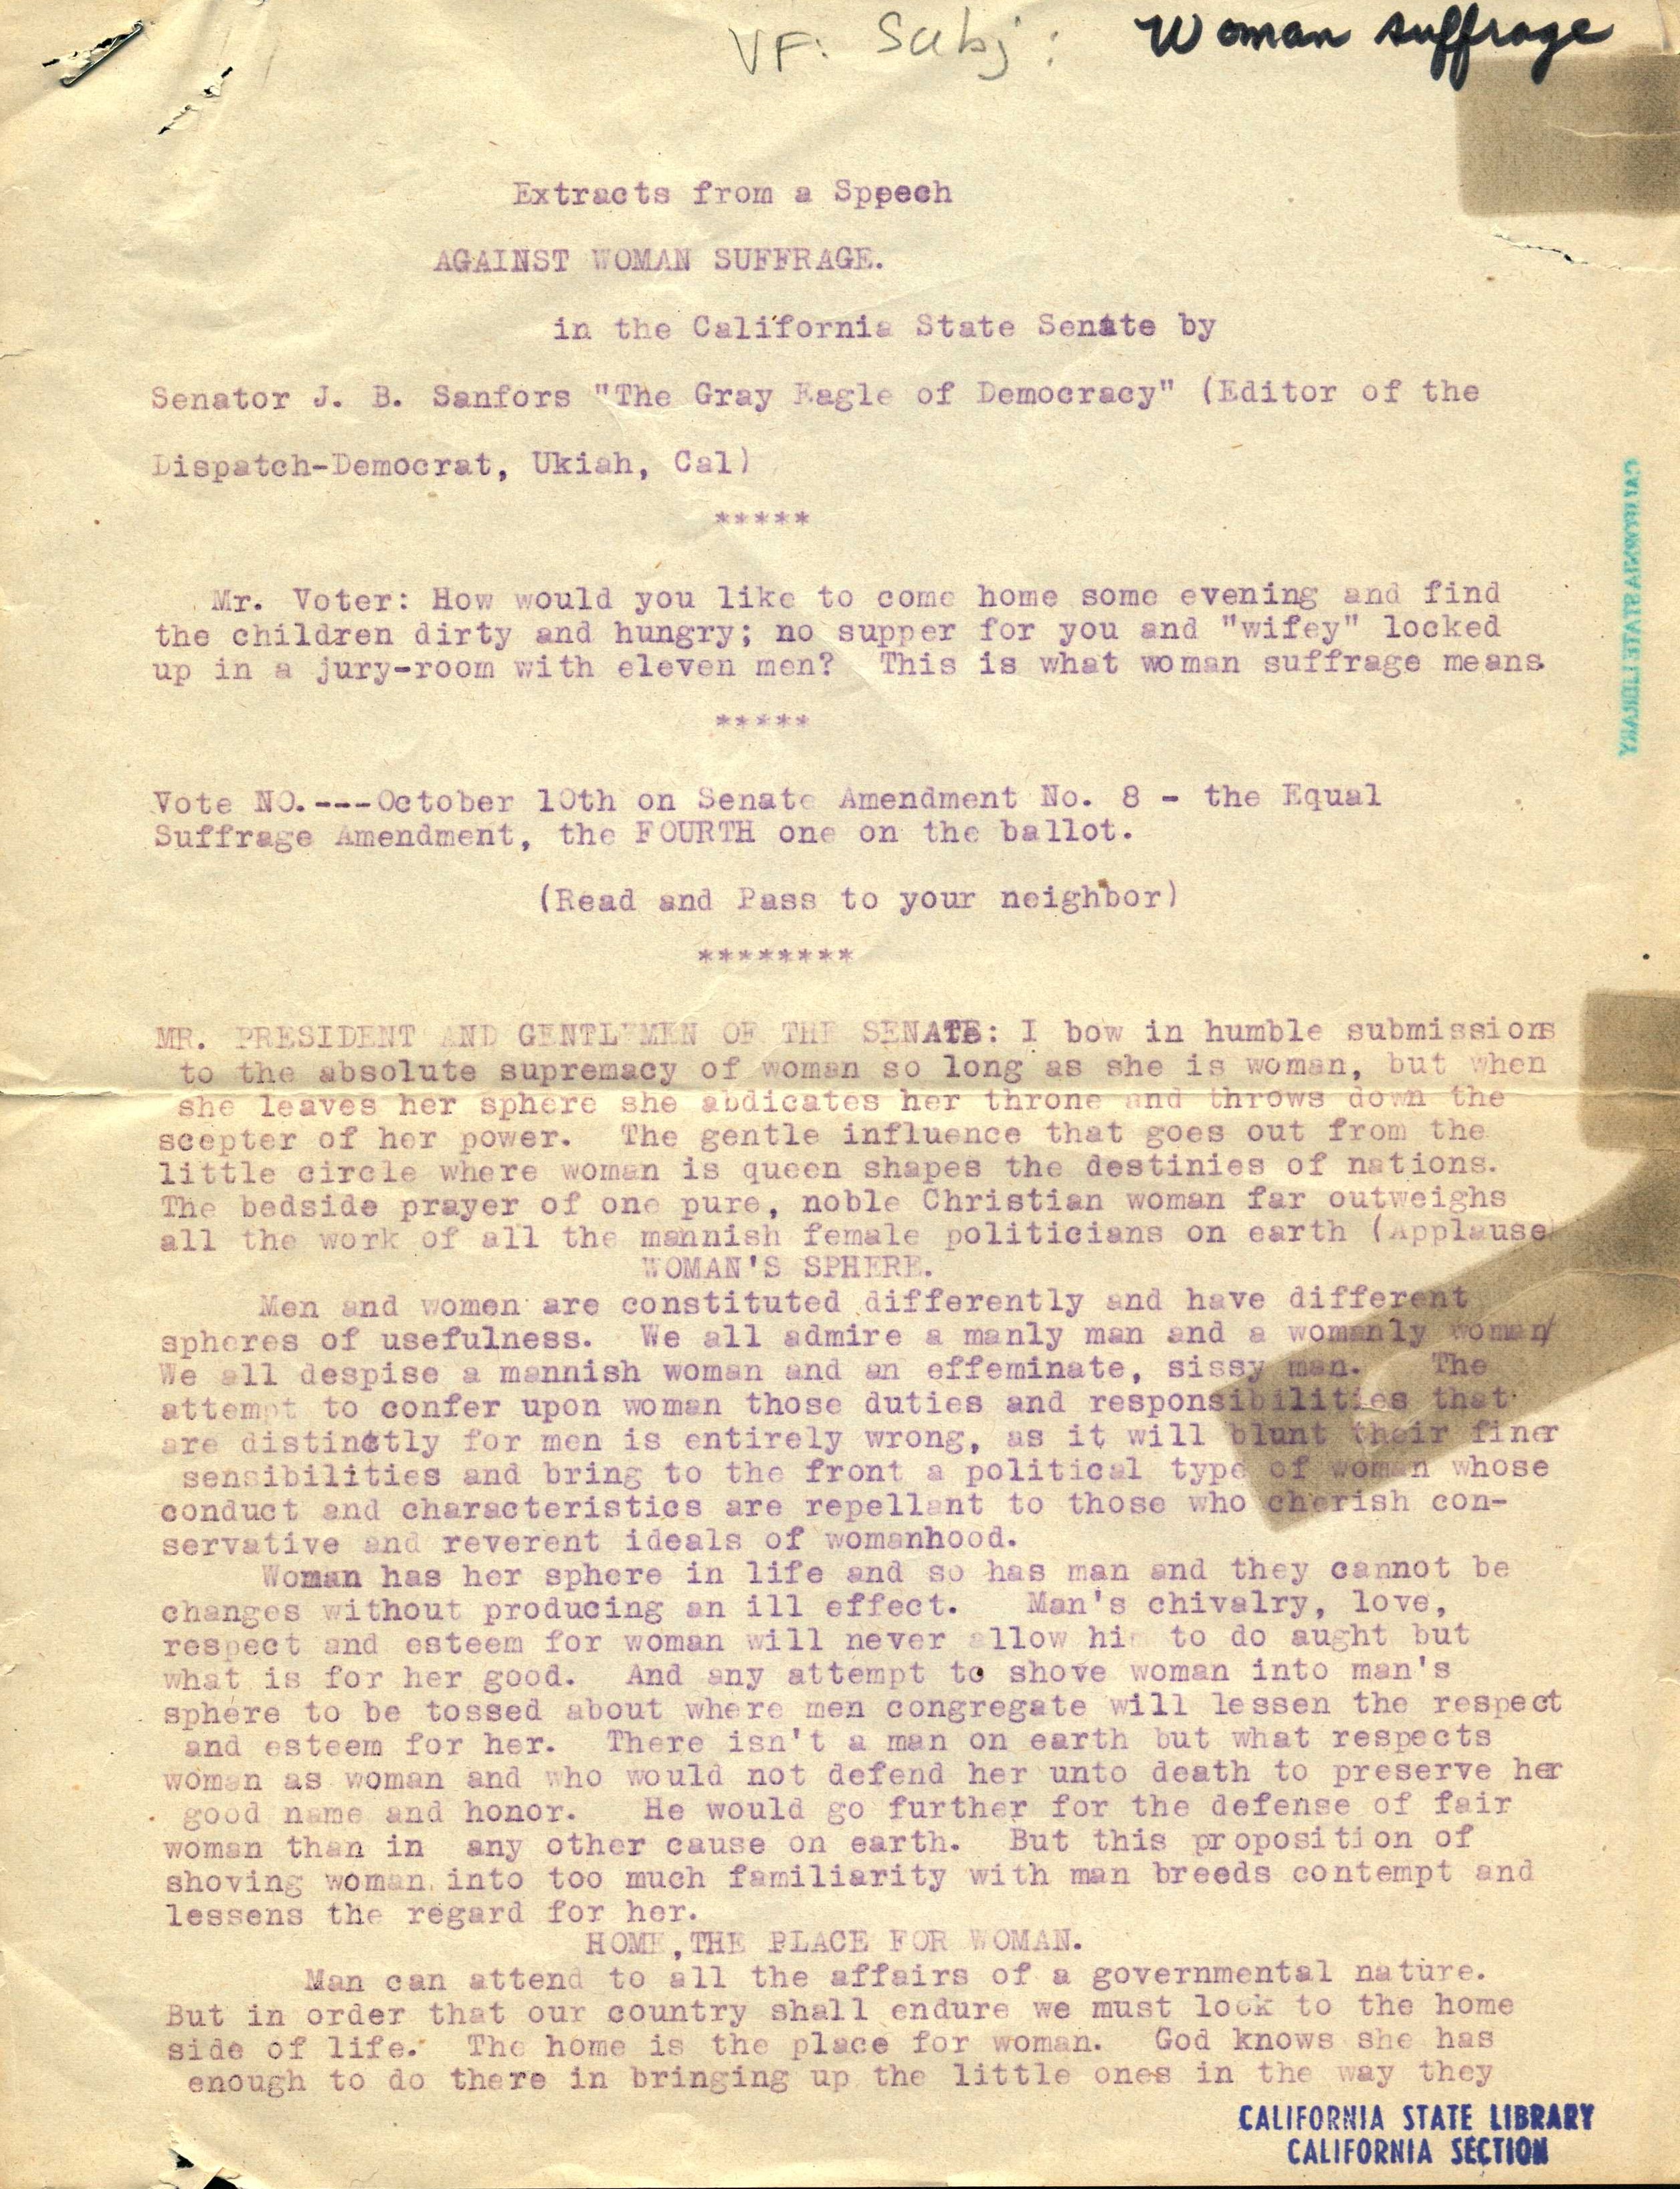 Shows typewritten text of portions of the speech